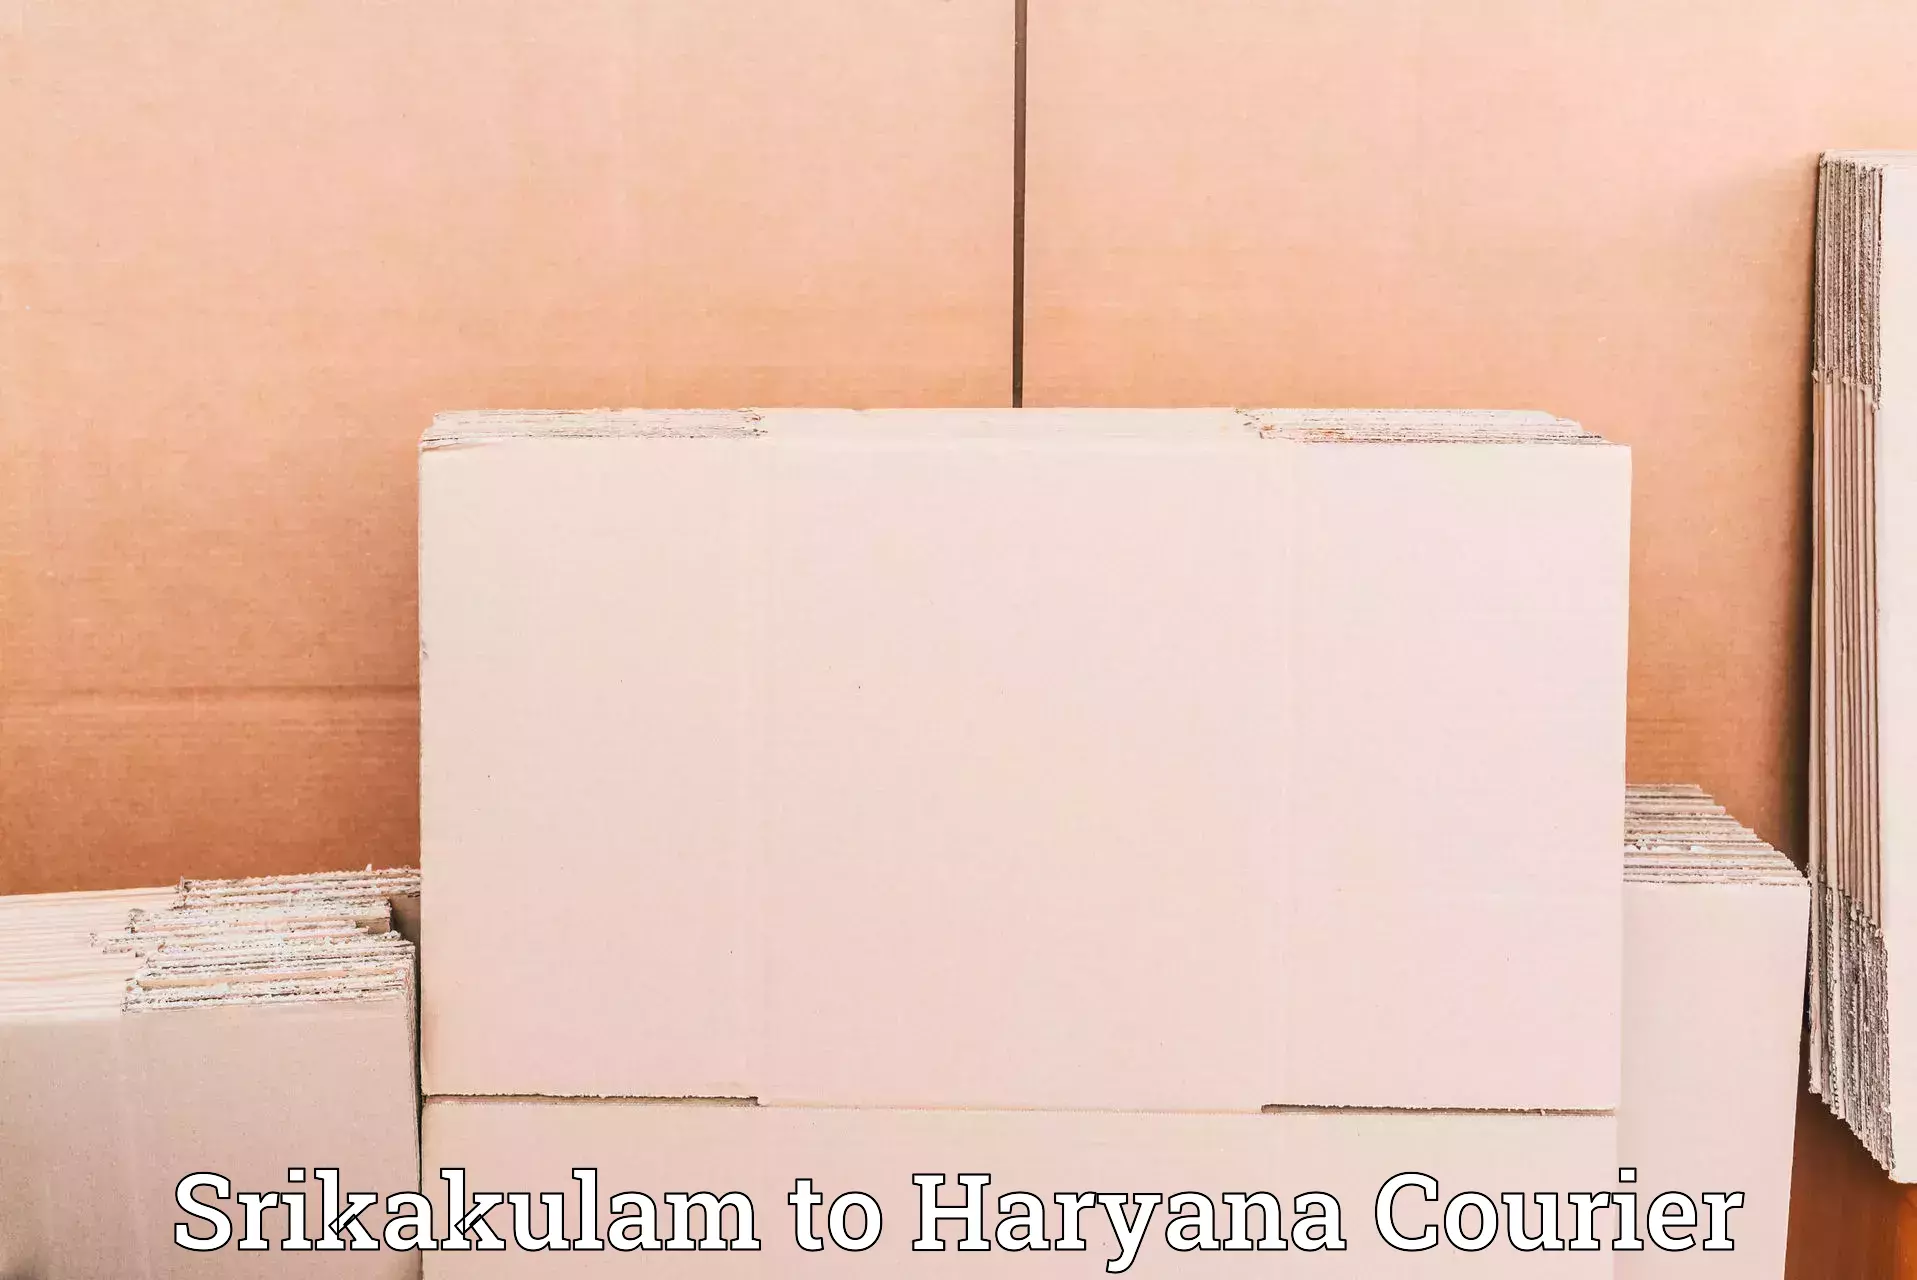 Efficient package consolidation Srikakulam to NCR Haryana